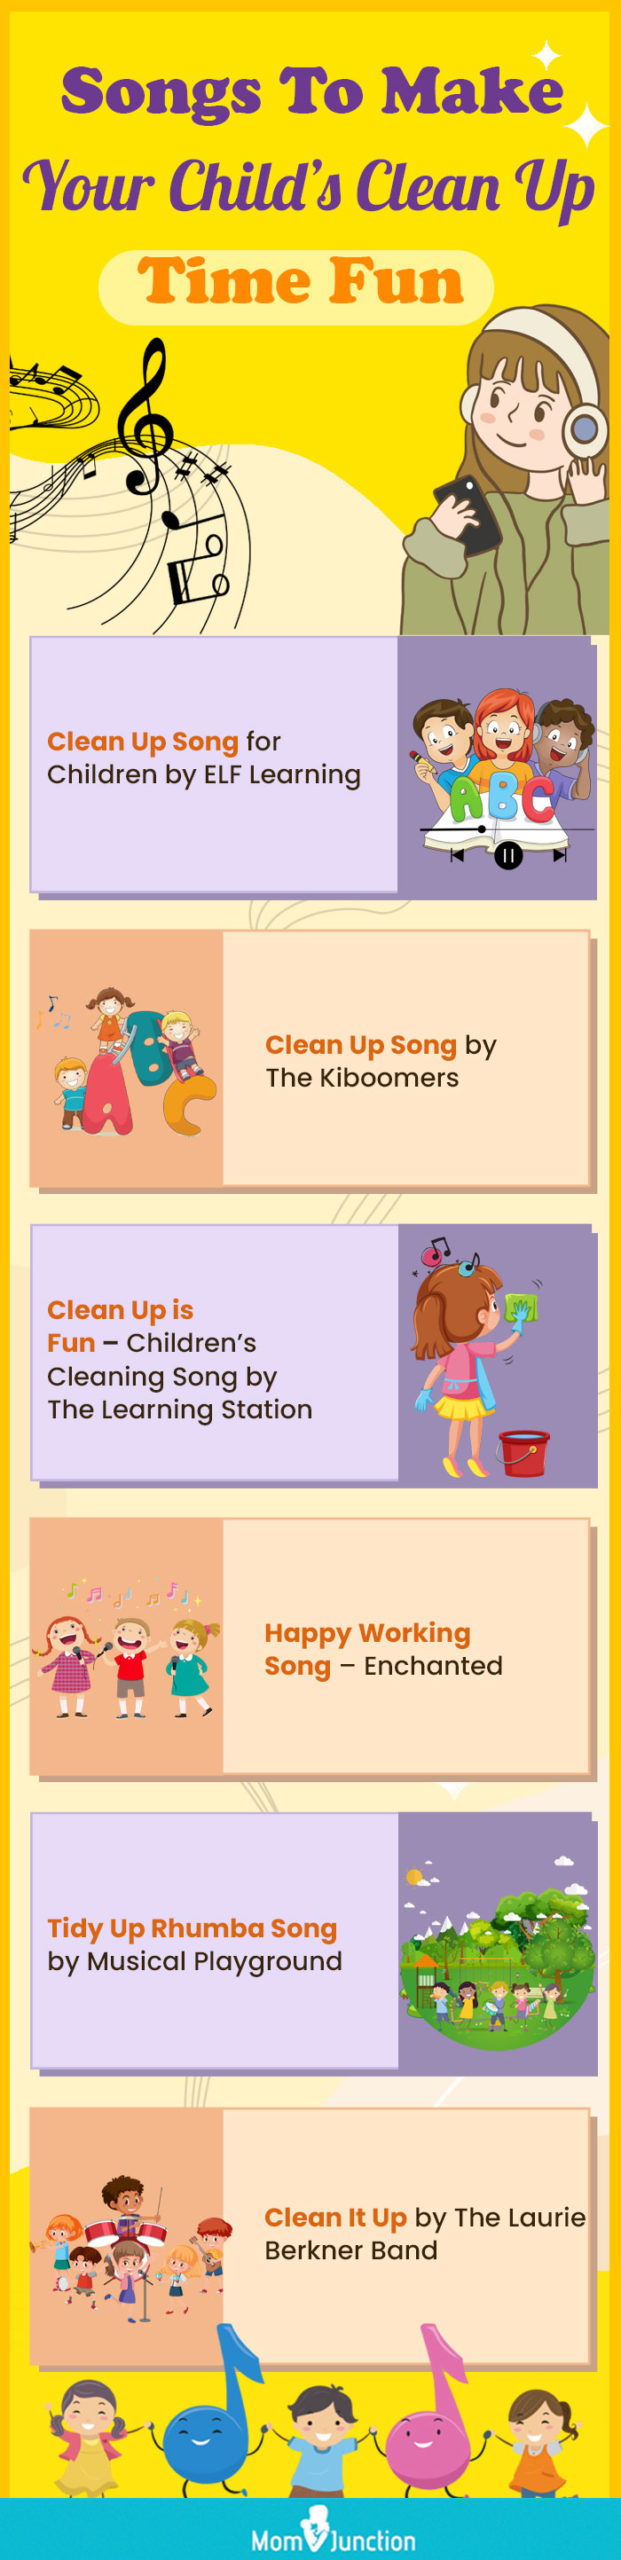 songs to make your child’s clean up time fun (infographic)